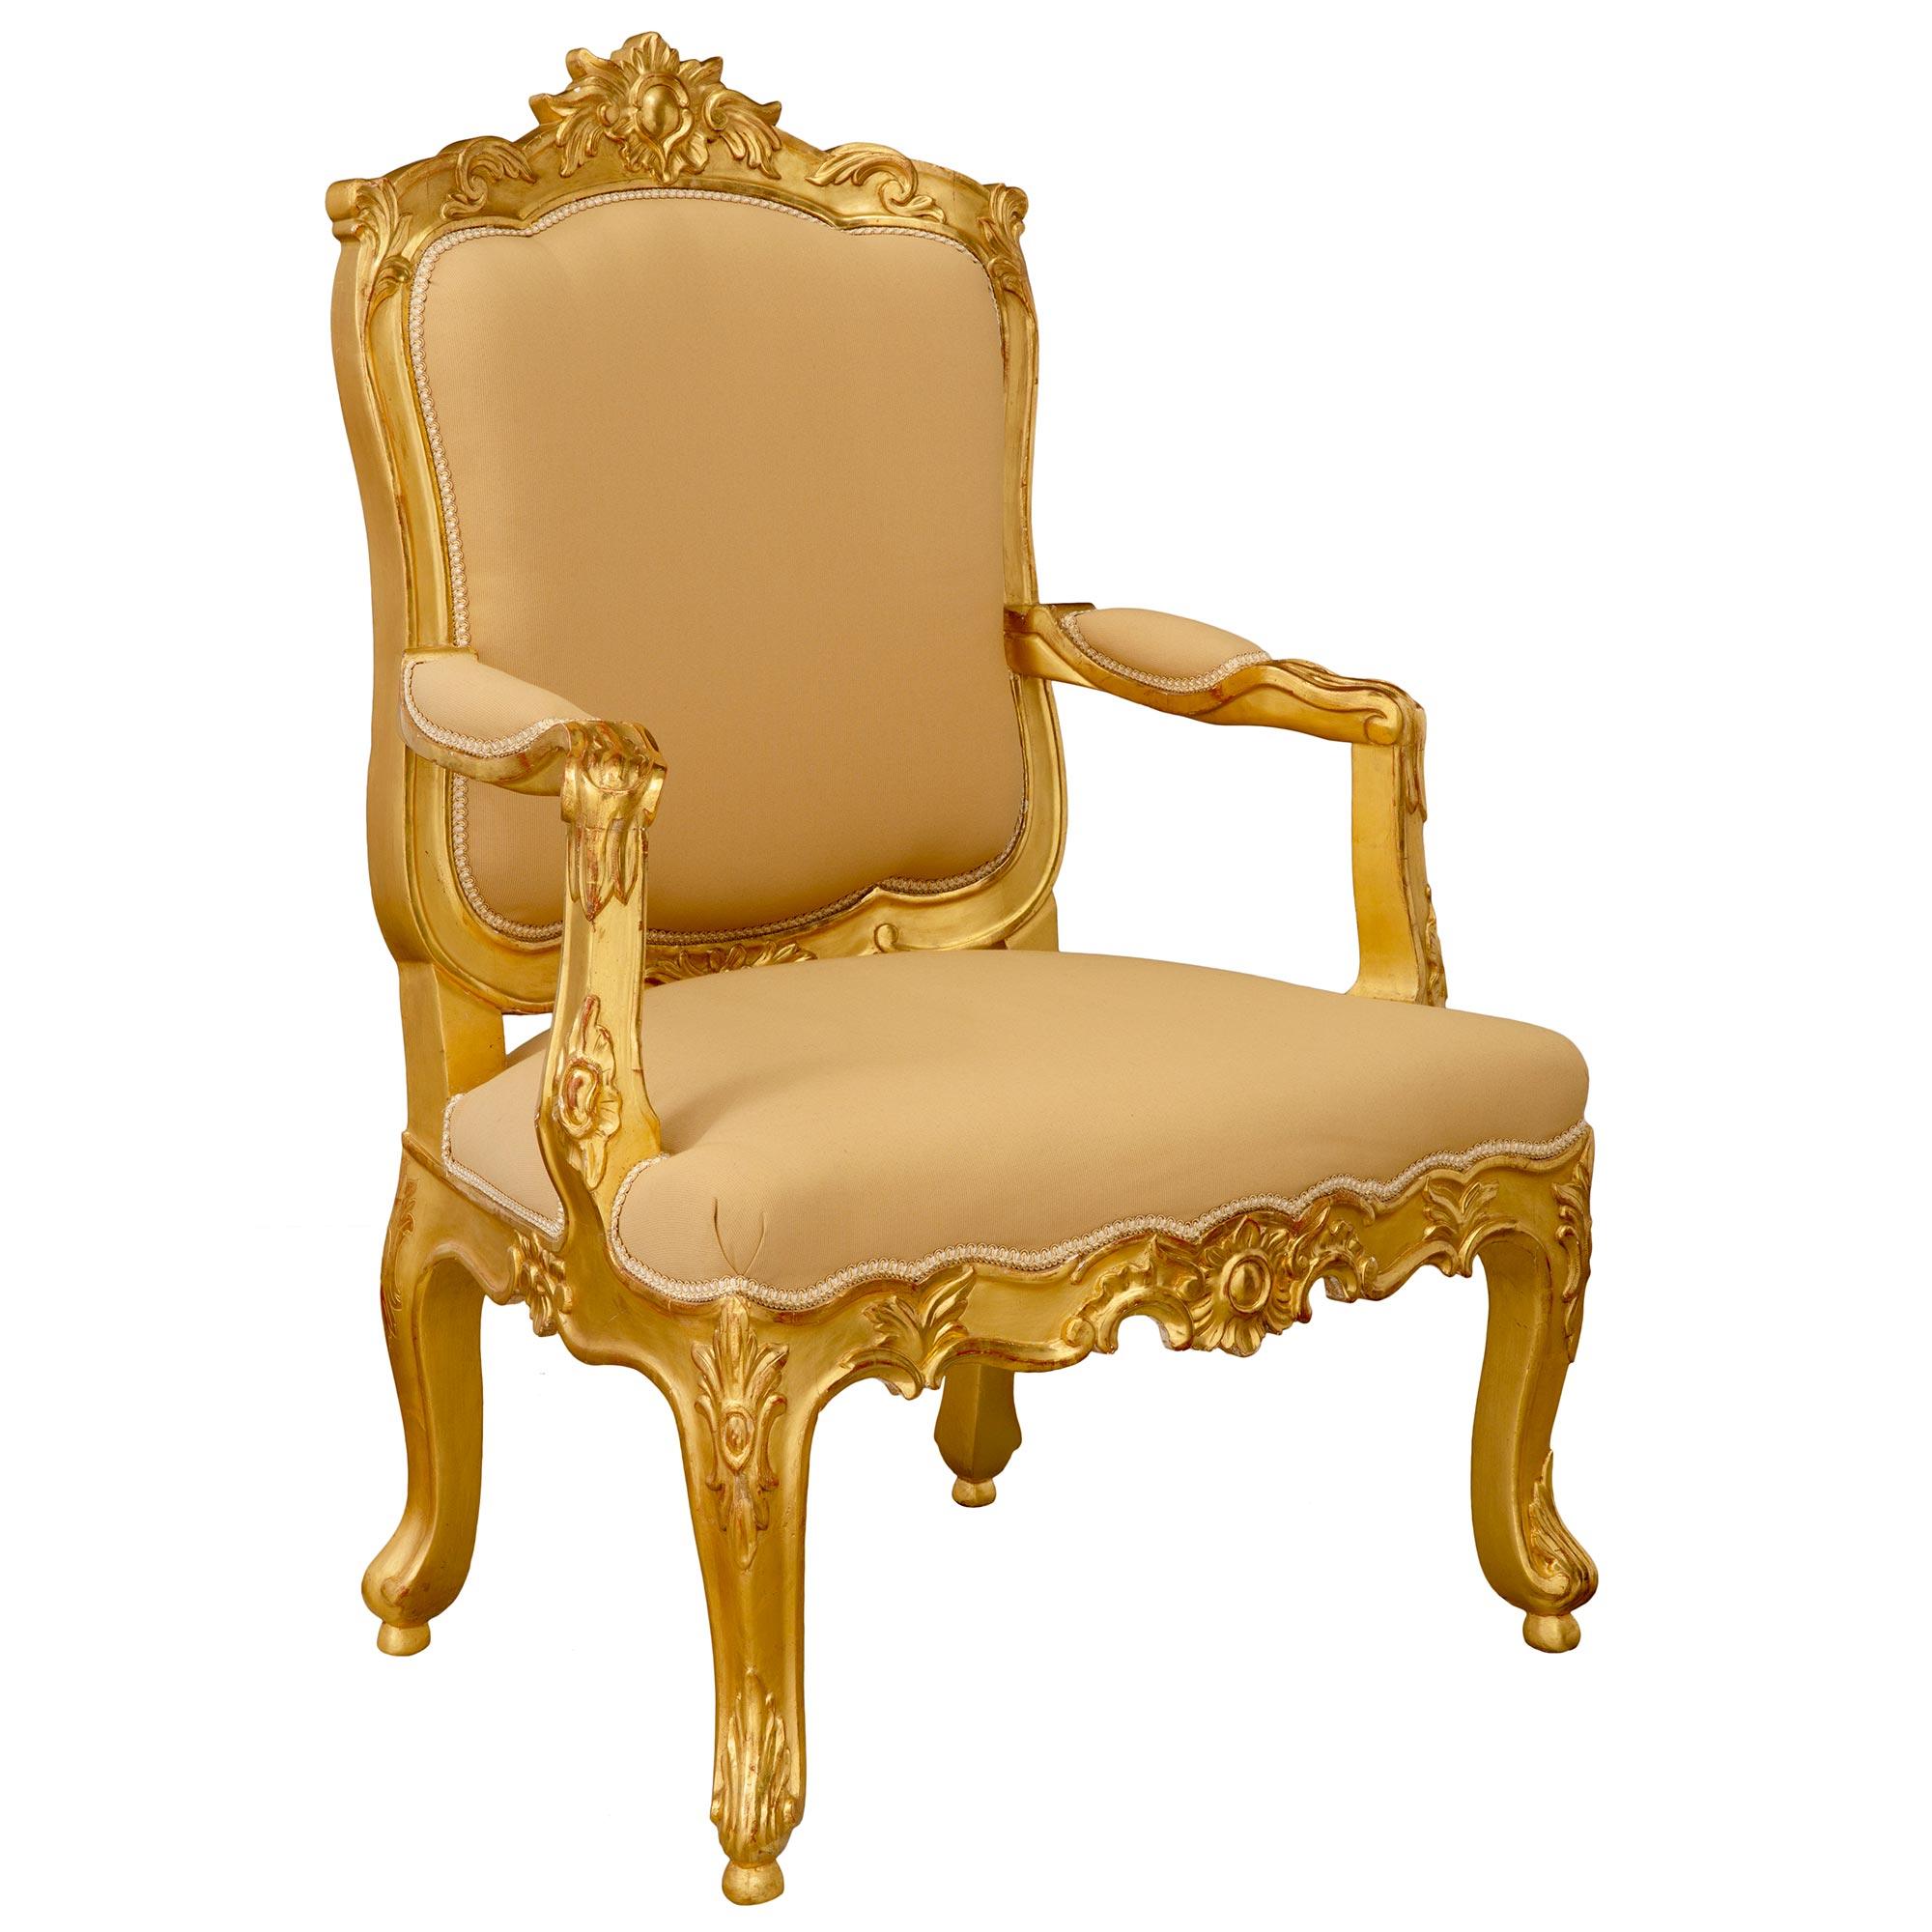 A wonderful pair of Italian 19th century Louis XV st. giltwood armchairs. Each chair is raised by elegant cabriole legs with large richly carved acanthus leaves and beautiful floral reserves at each corners. The aprons display most decorative